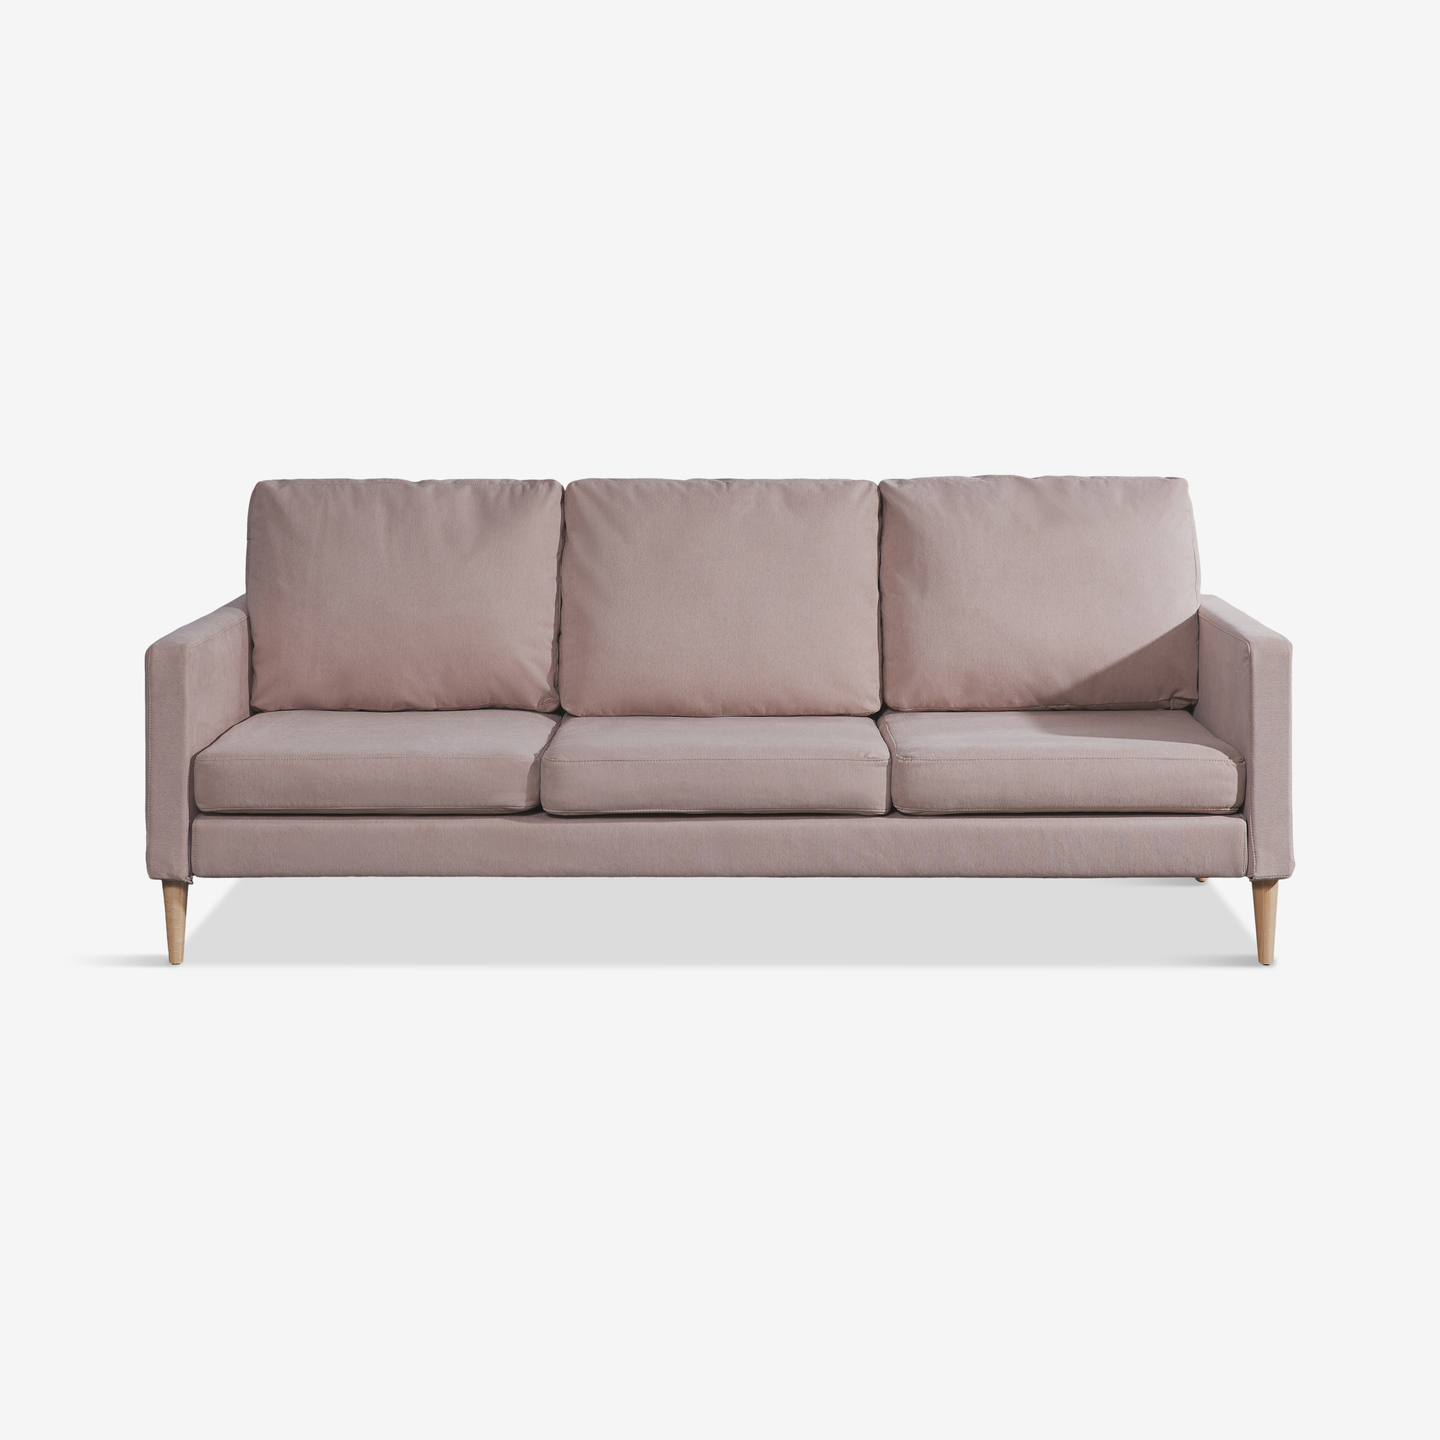 424_Campaign-Sofa-Dusty-Rose_Flat-Front 2020